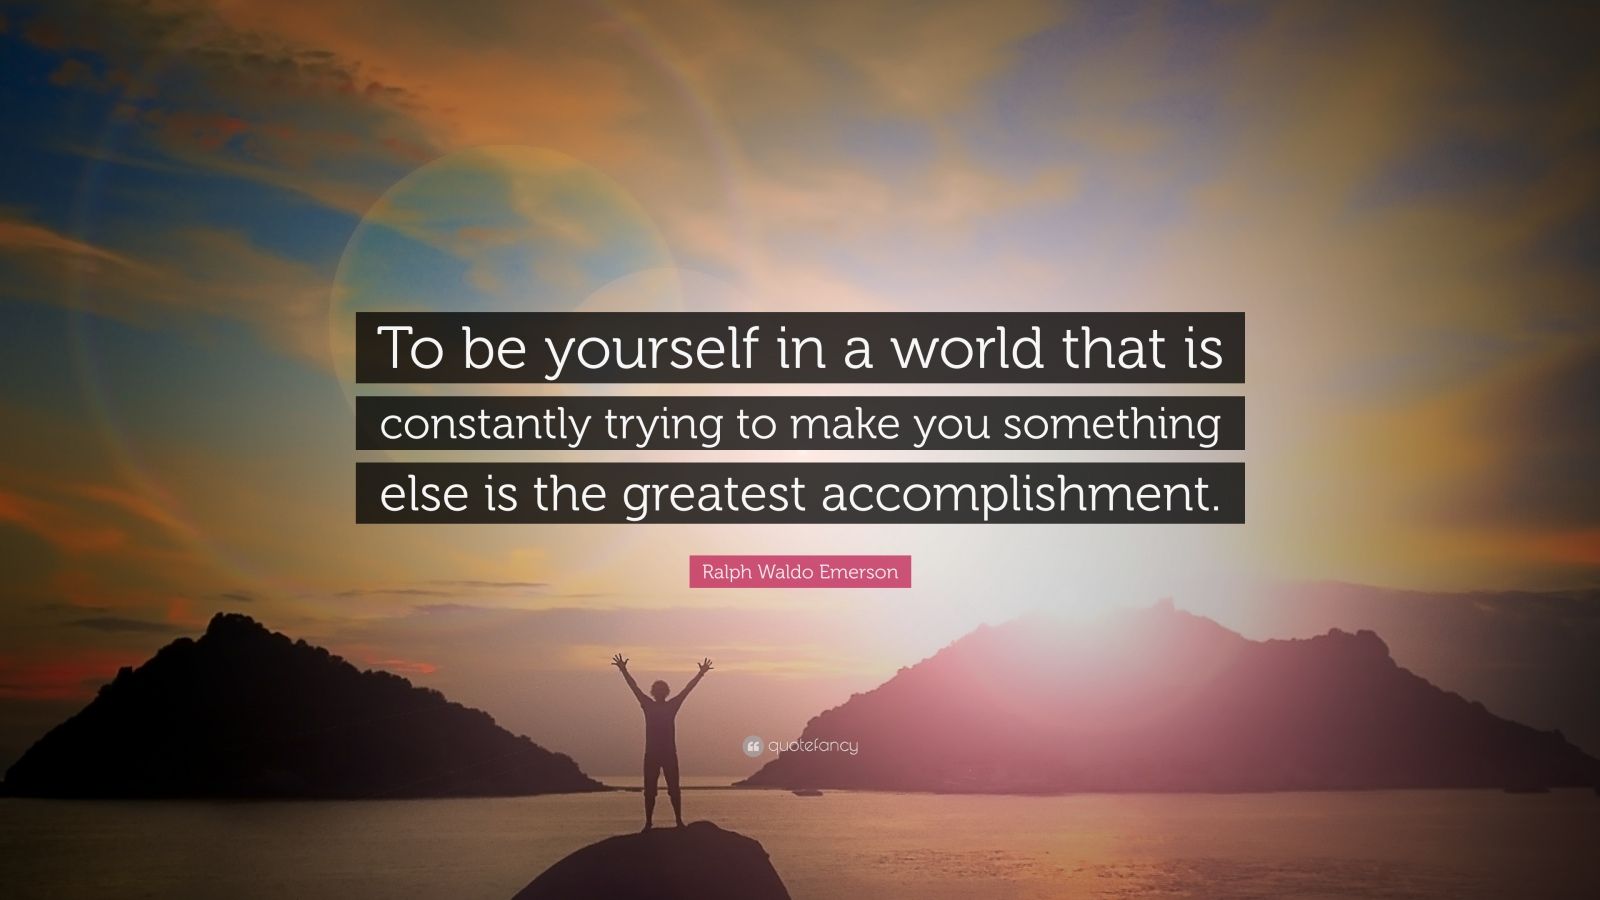 Ralph Waldo Emerson Quote: “To be yourself in a world that is